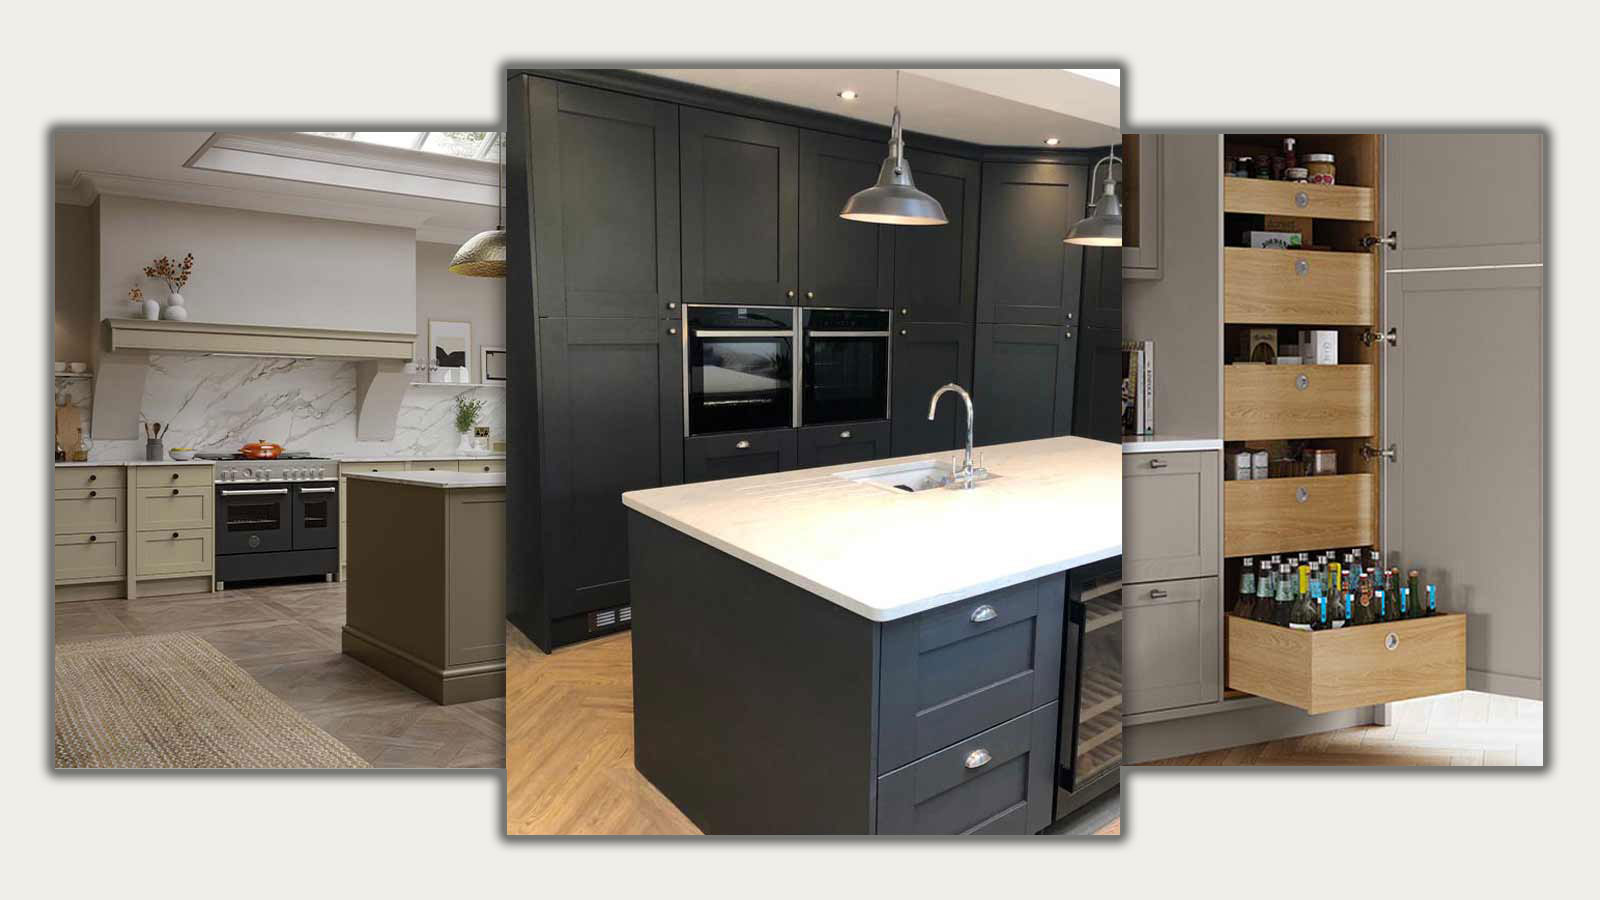 Three distinct Shaker kitchens with black, pale green and grey doors